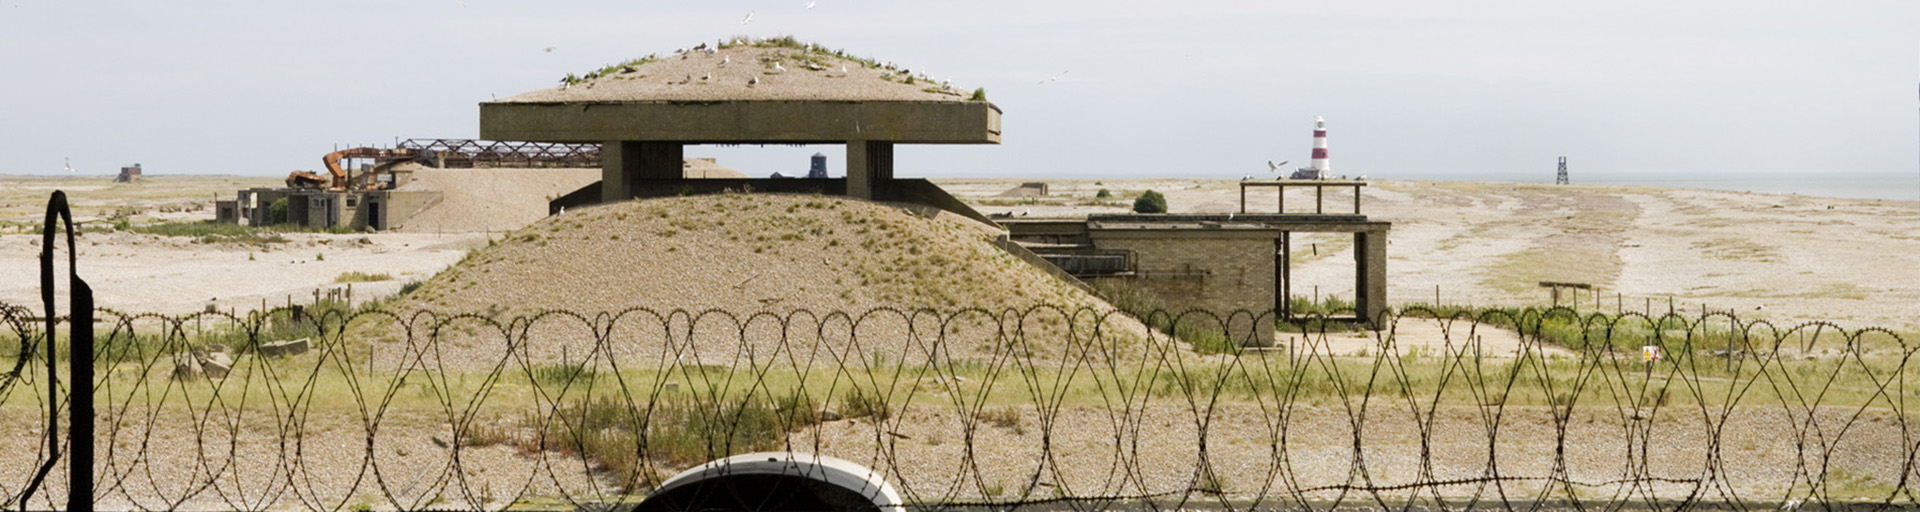 Atomic Weapons Research Establishment, Orford Ness, Suffolk, view taken between the two 1960s test structures, known as the Pagodas.